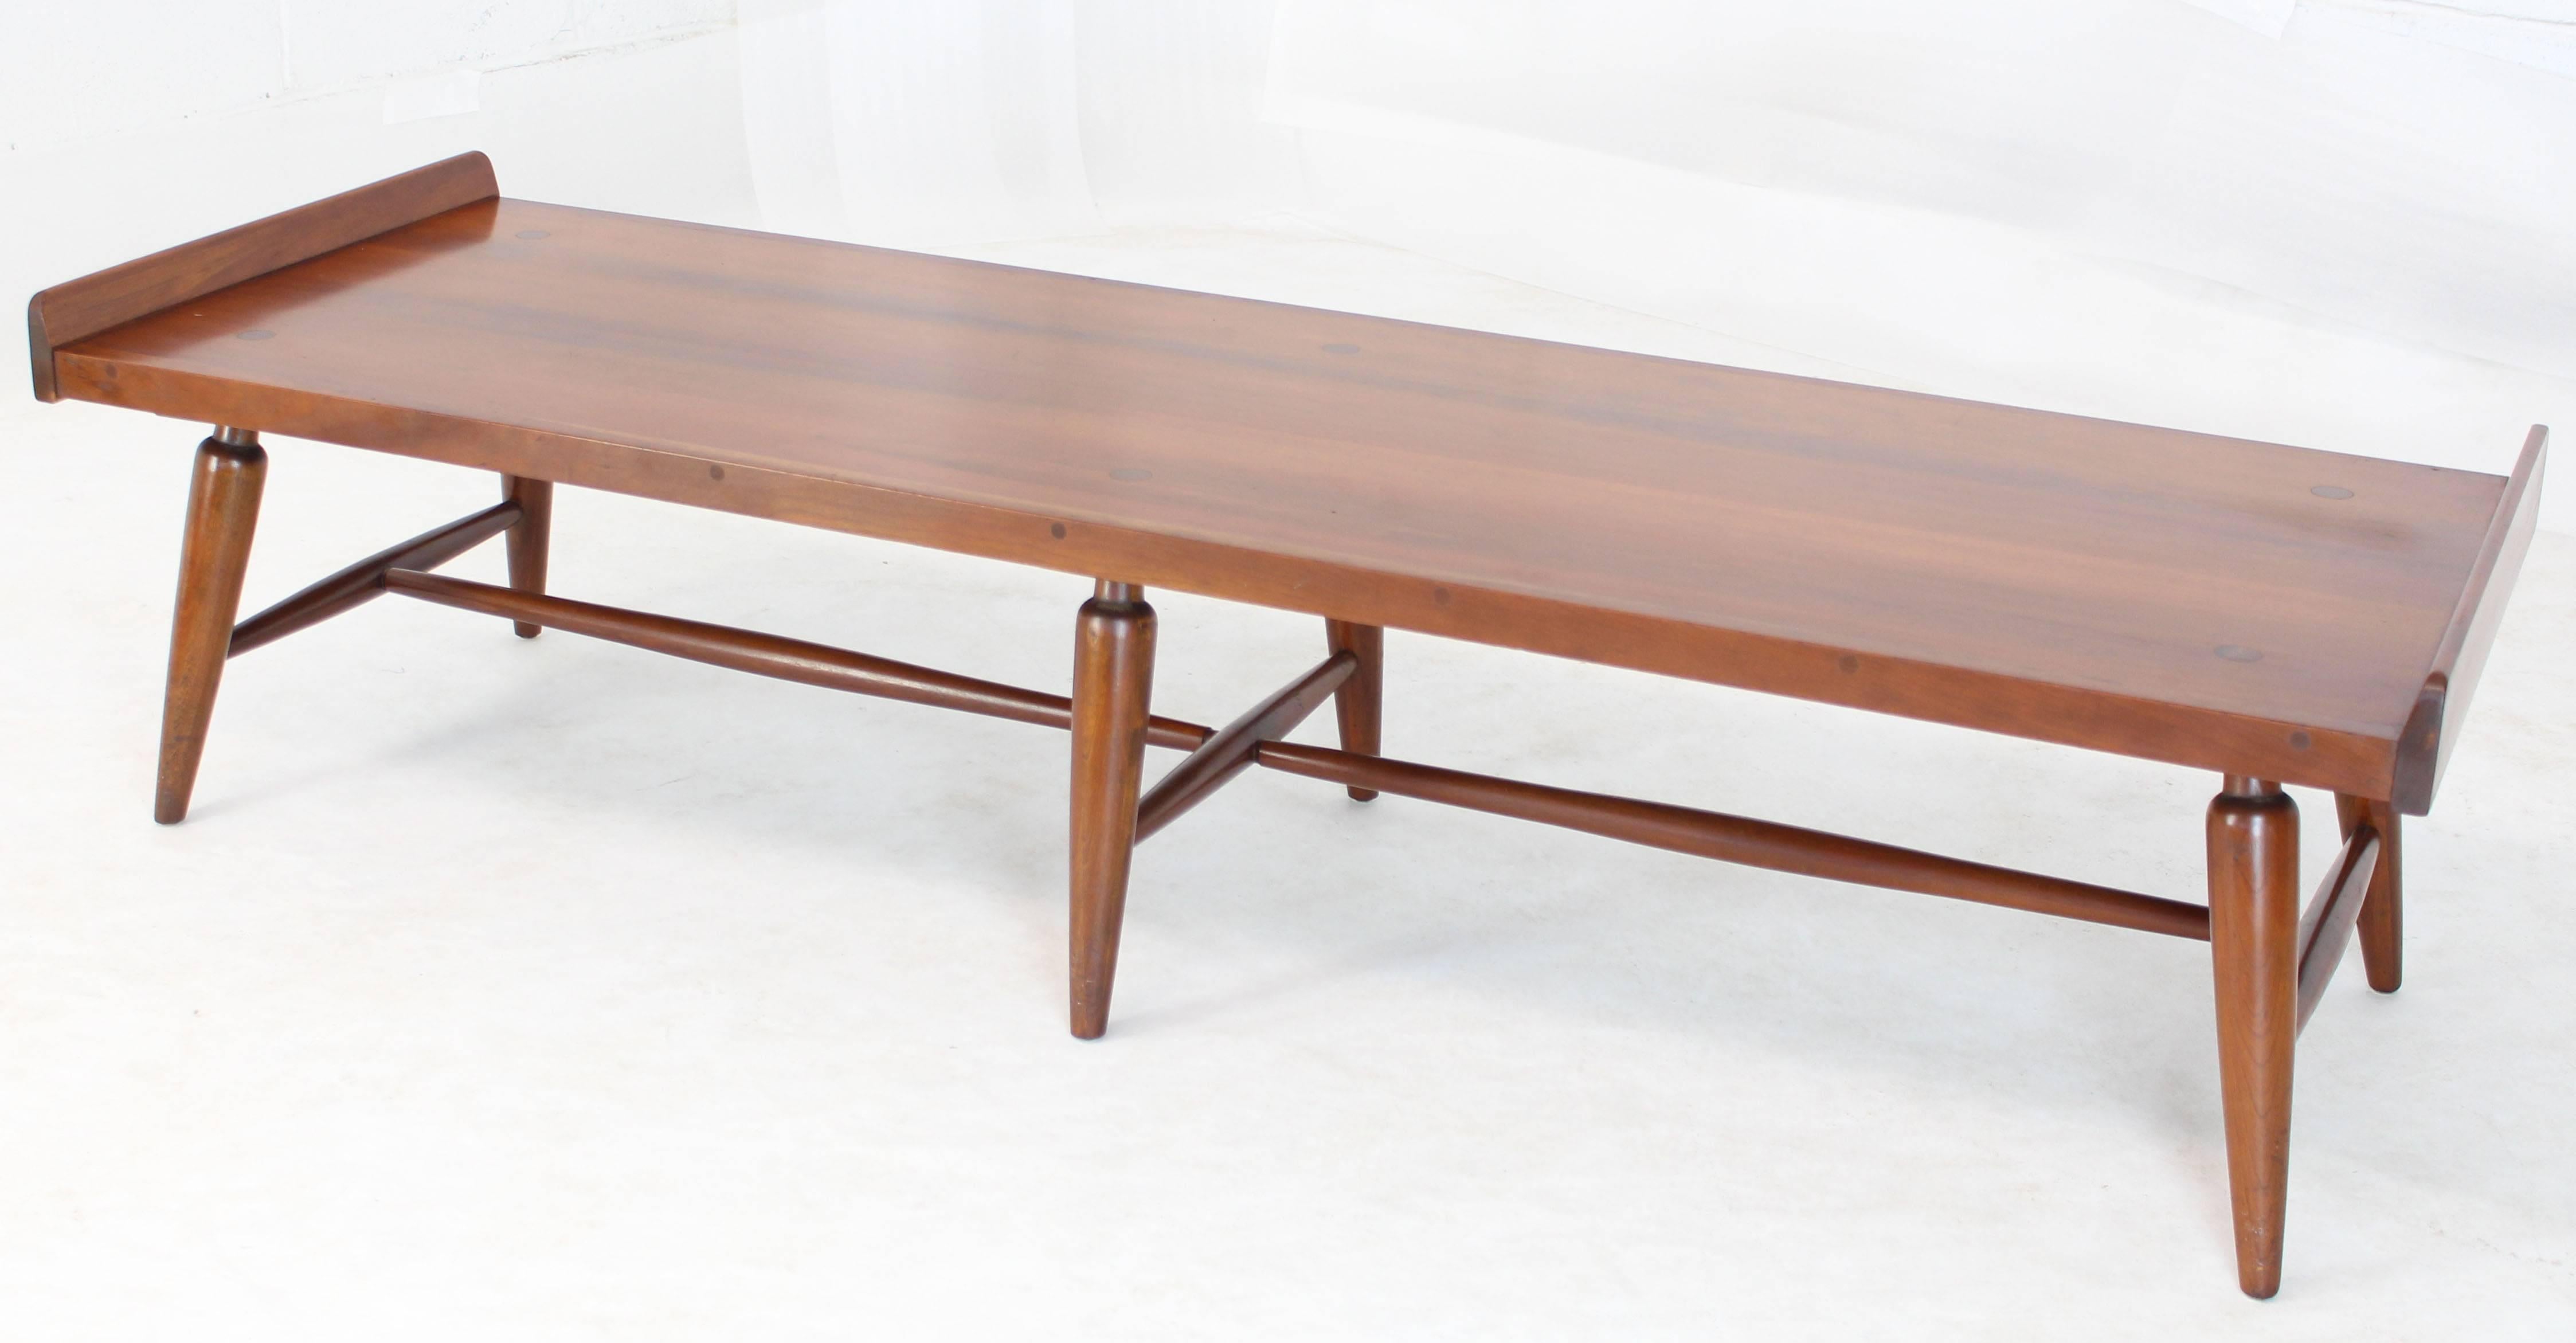 Very nice unusual solid maple bench or coffee table.
   